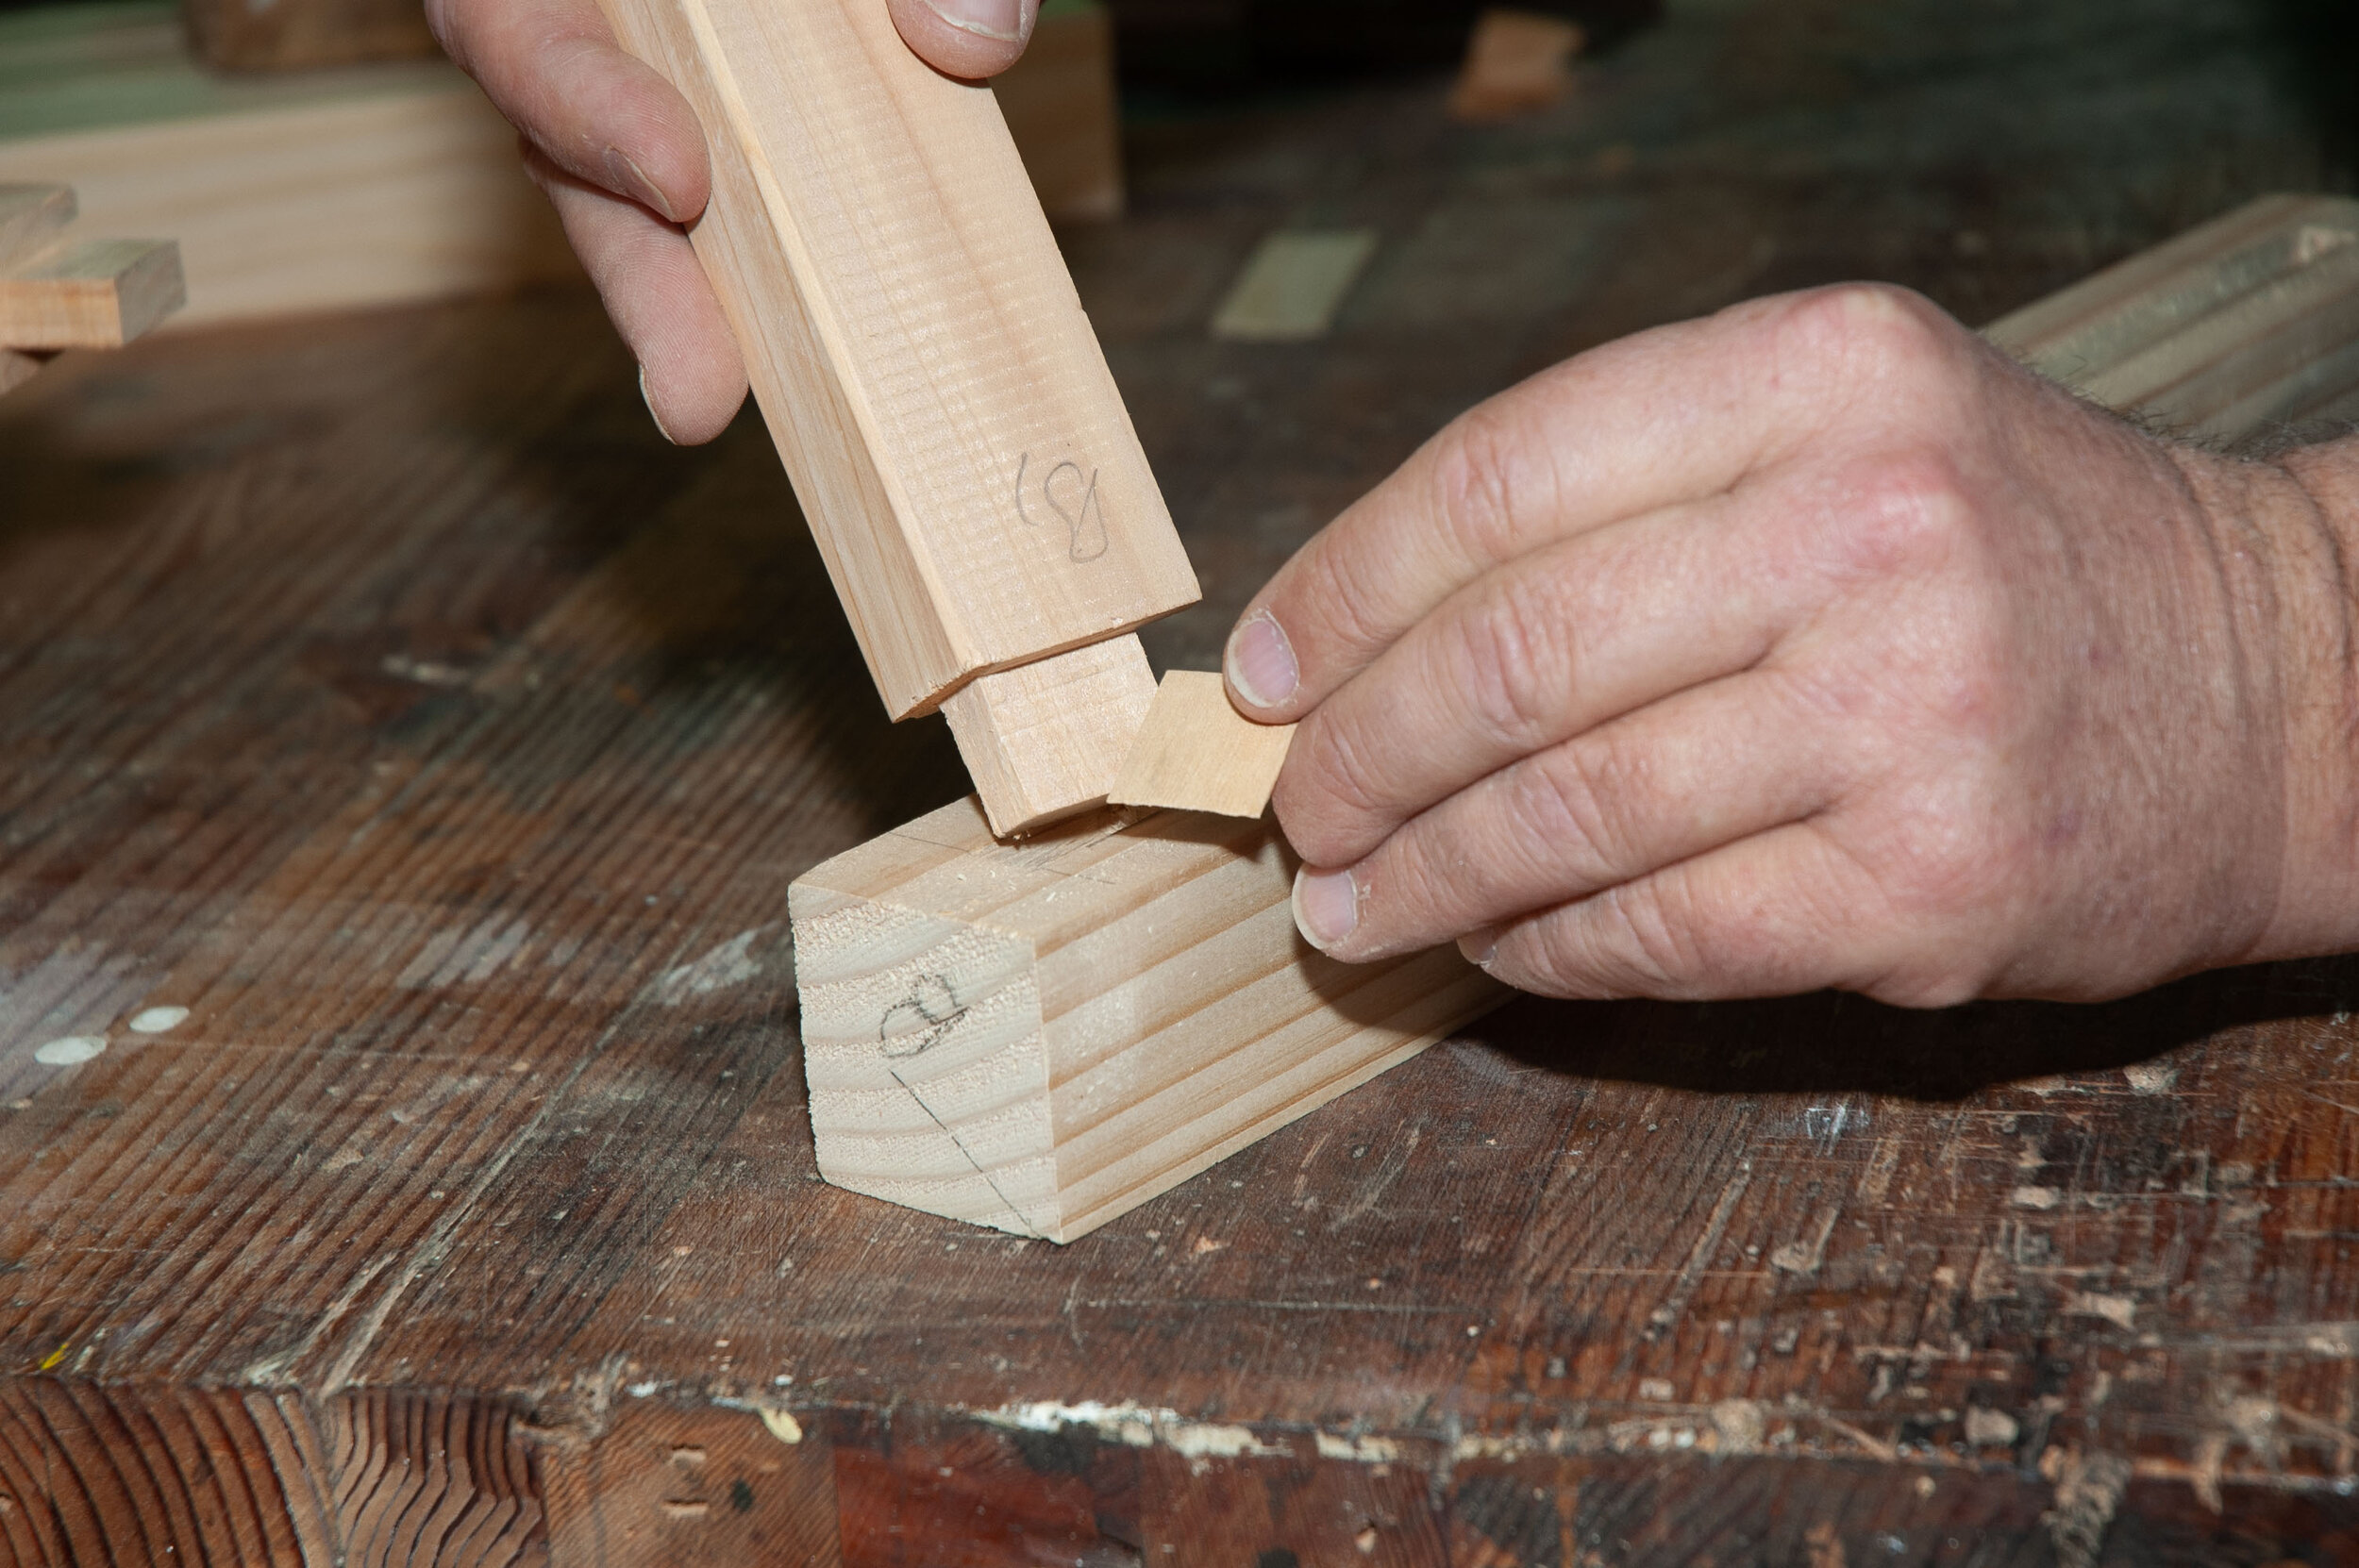 Repairing an oversize mortise (or an undersize tenon) with a scrap of veneer